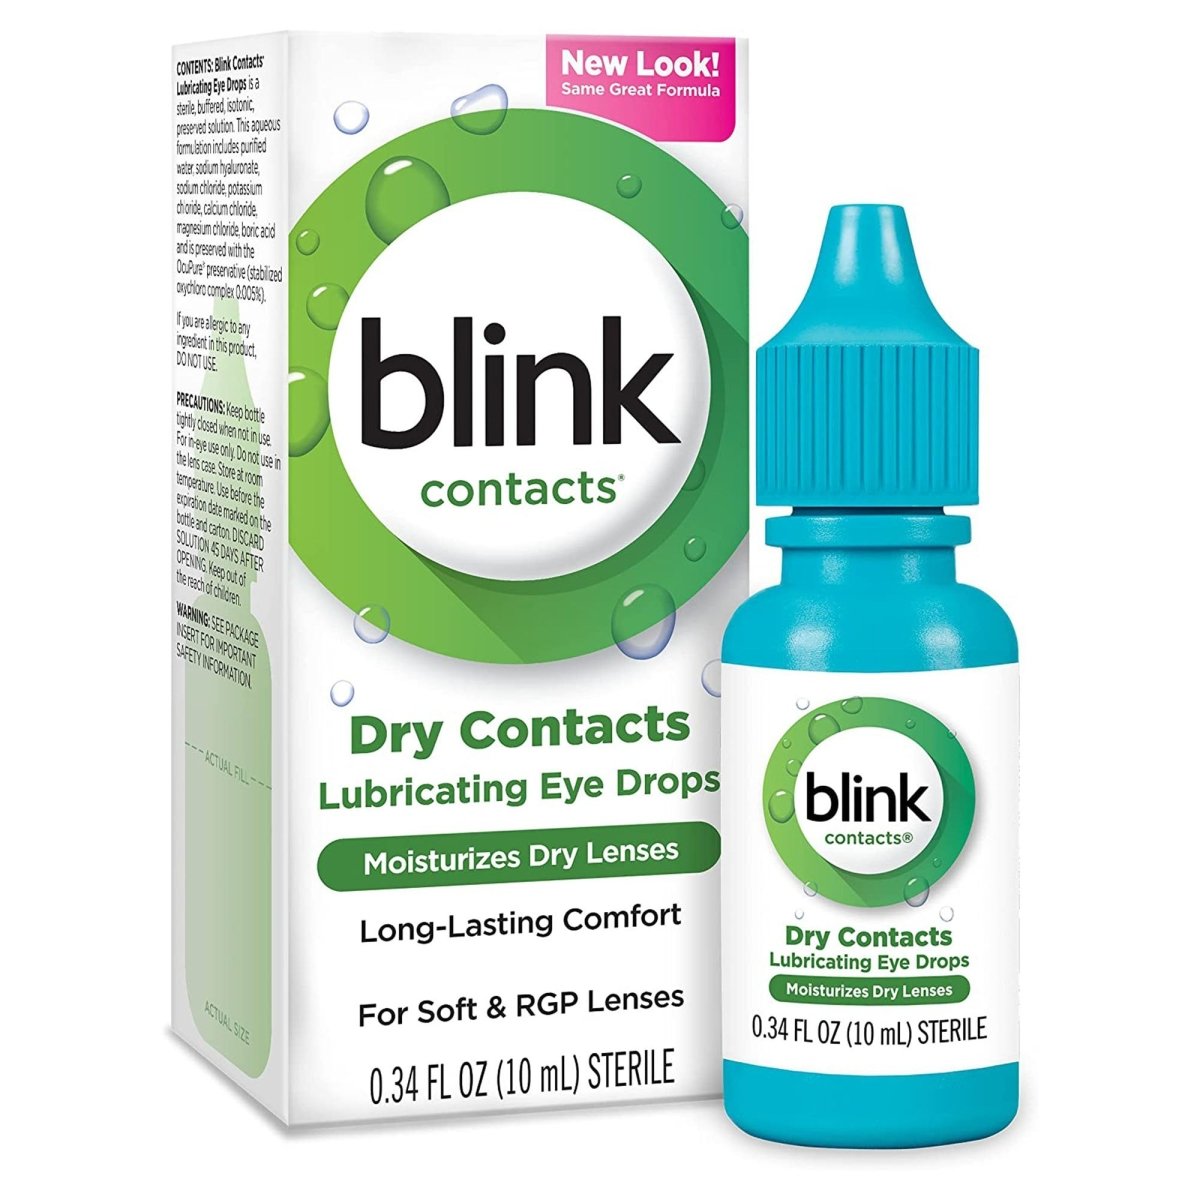 Blink Contacts Purified Water / Sodium Chloride Contact Lens Solution - 725899_EA - 1